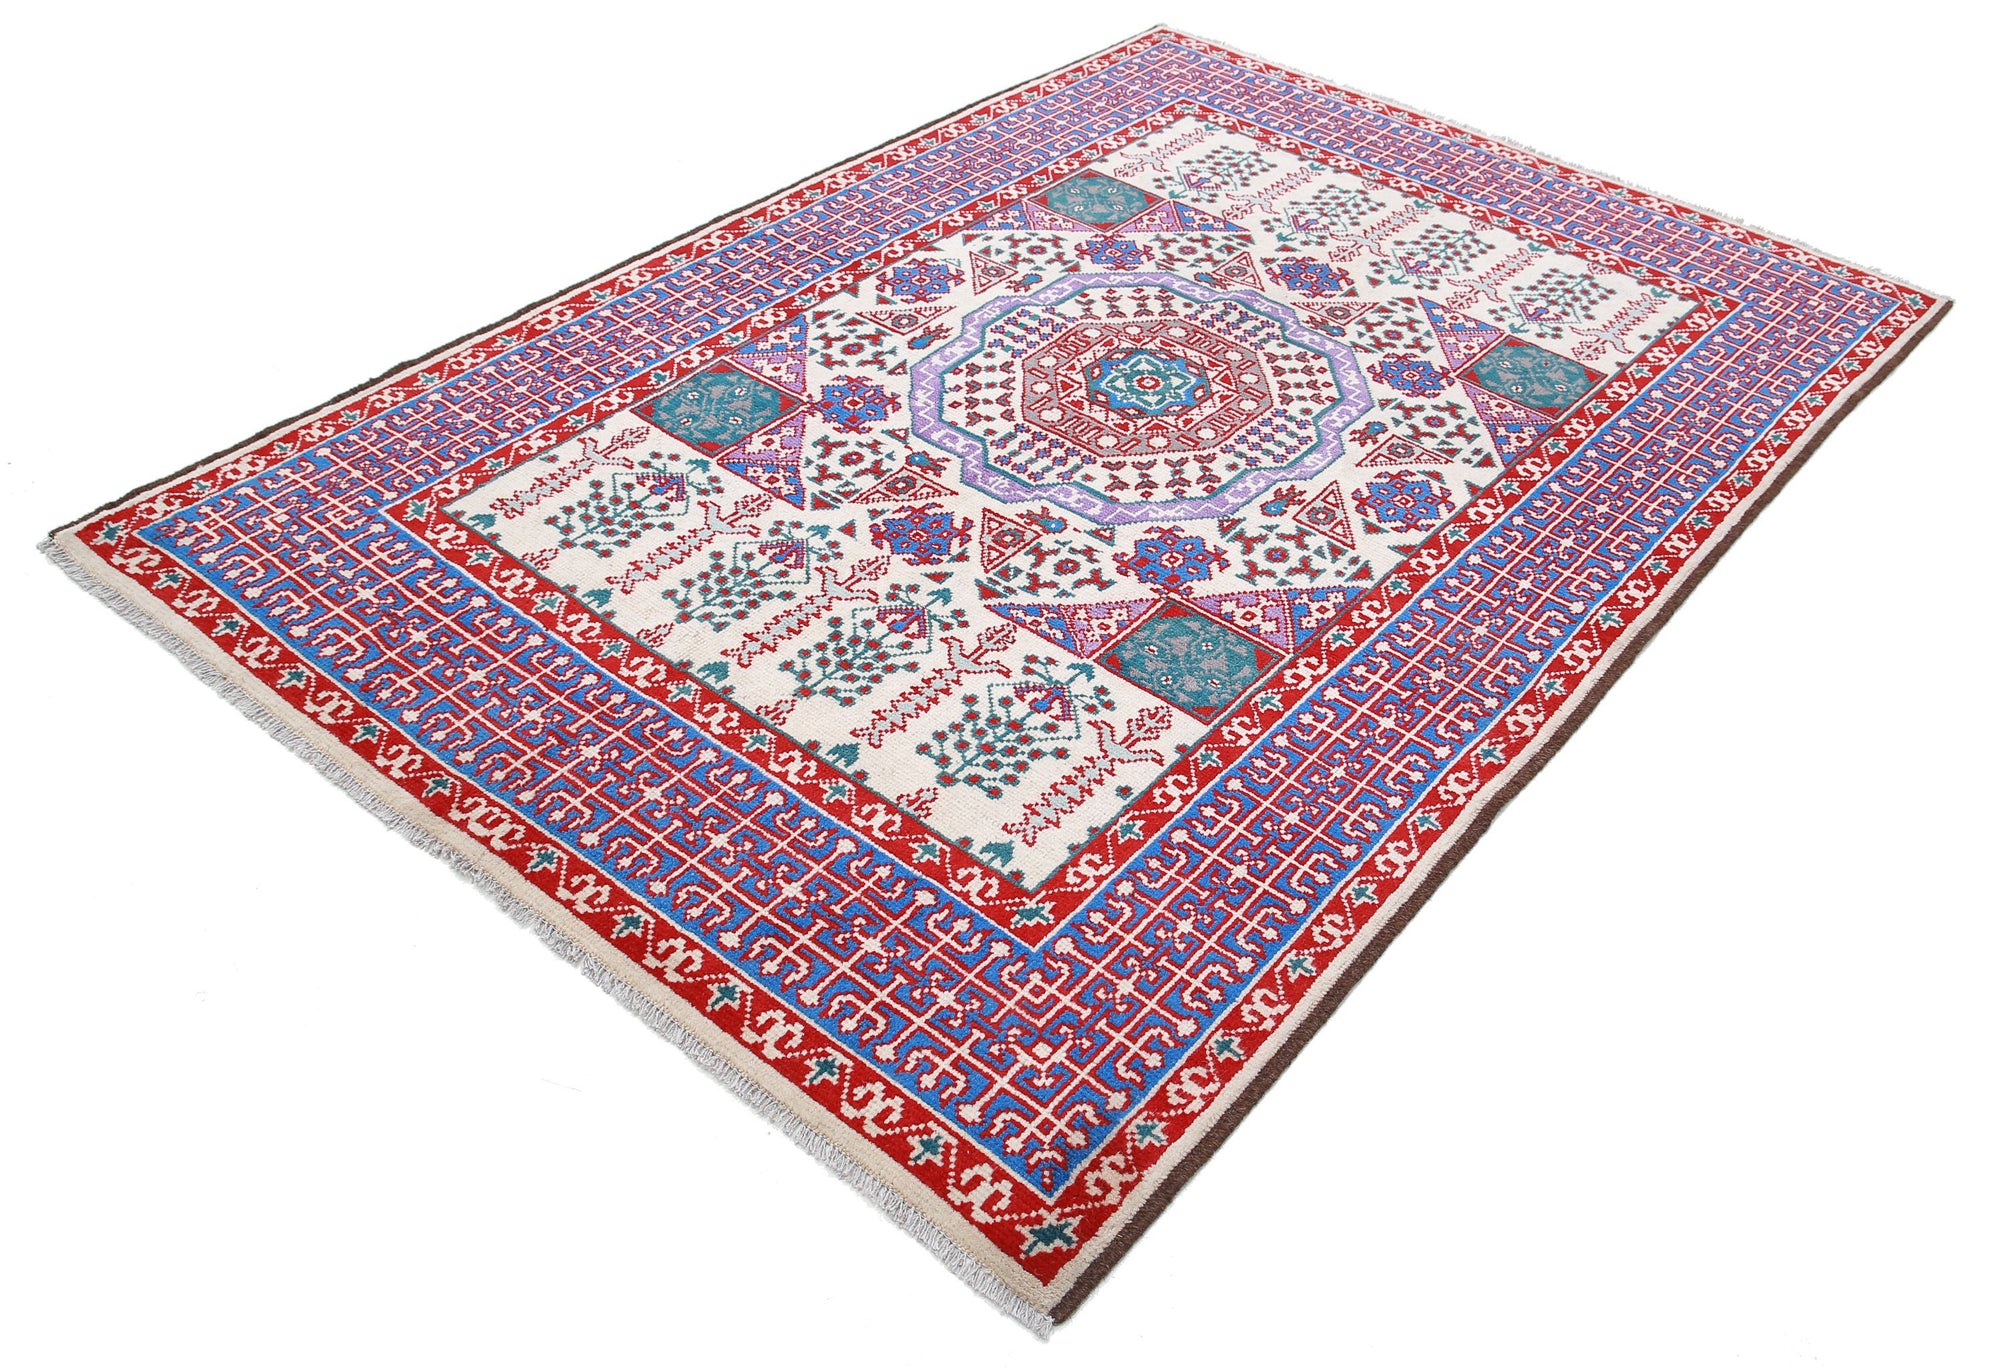 Revival-hand-knotted-qarghani-wool-rug-5014226-2.jpg